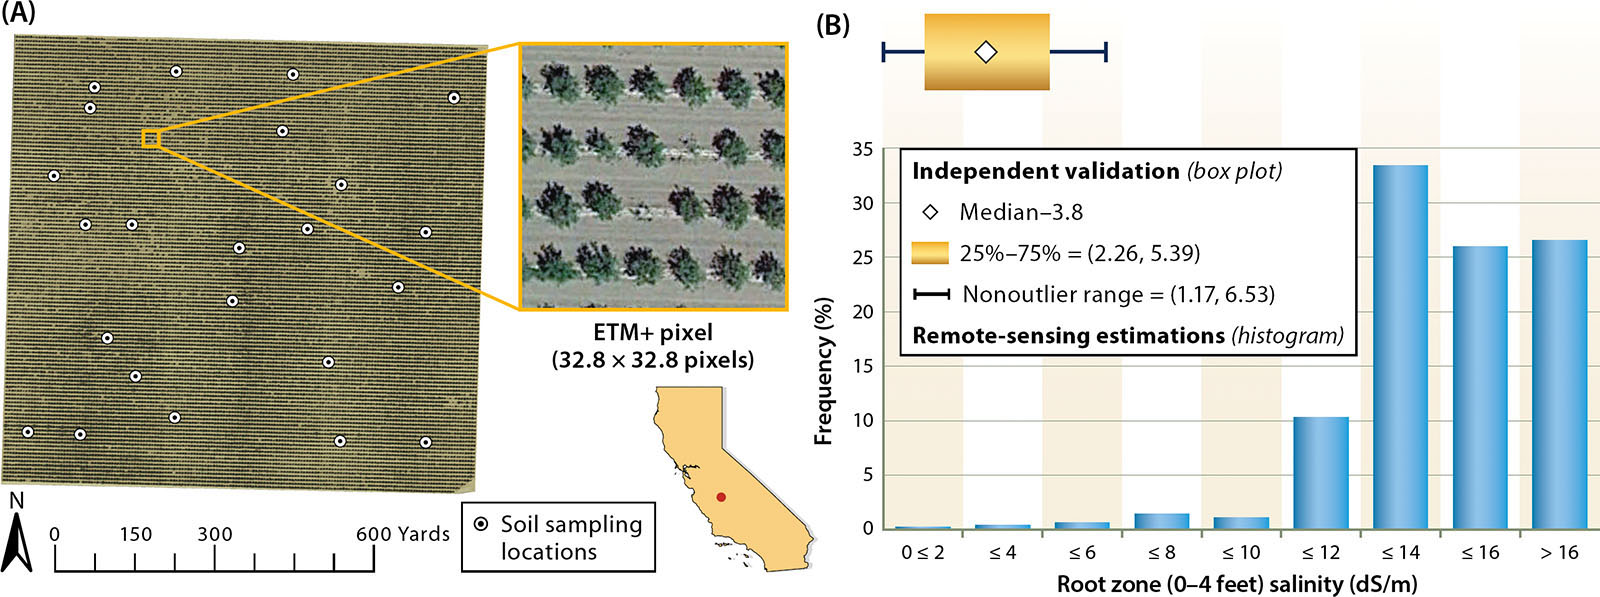 (A) Independent soil sampling over a 150-acre almond (Prunus dulcis Mill.) orchard in Kern County (B) compared with remote-sensing estimations of root zone salinity.